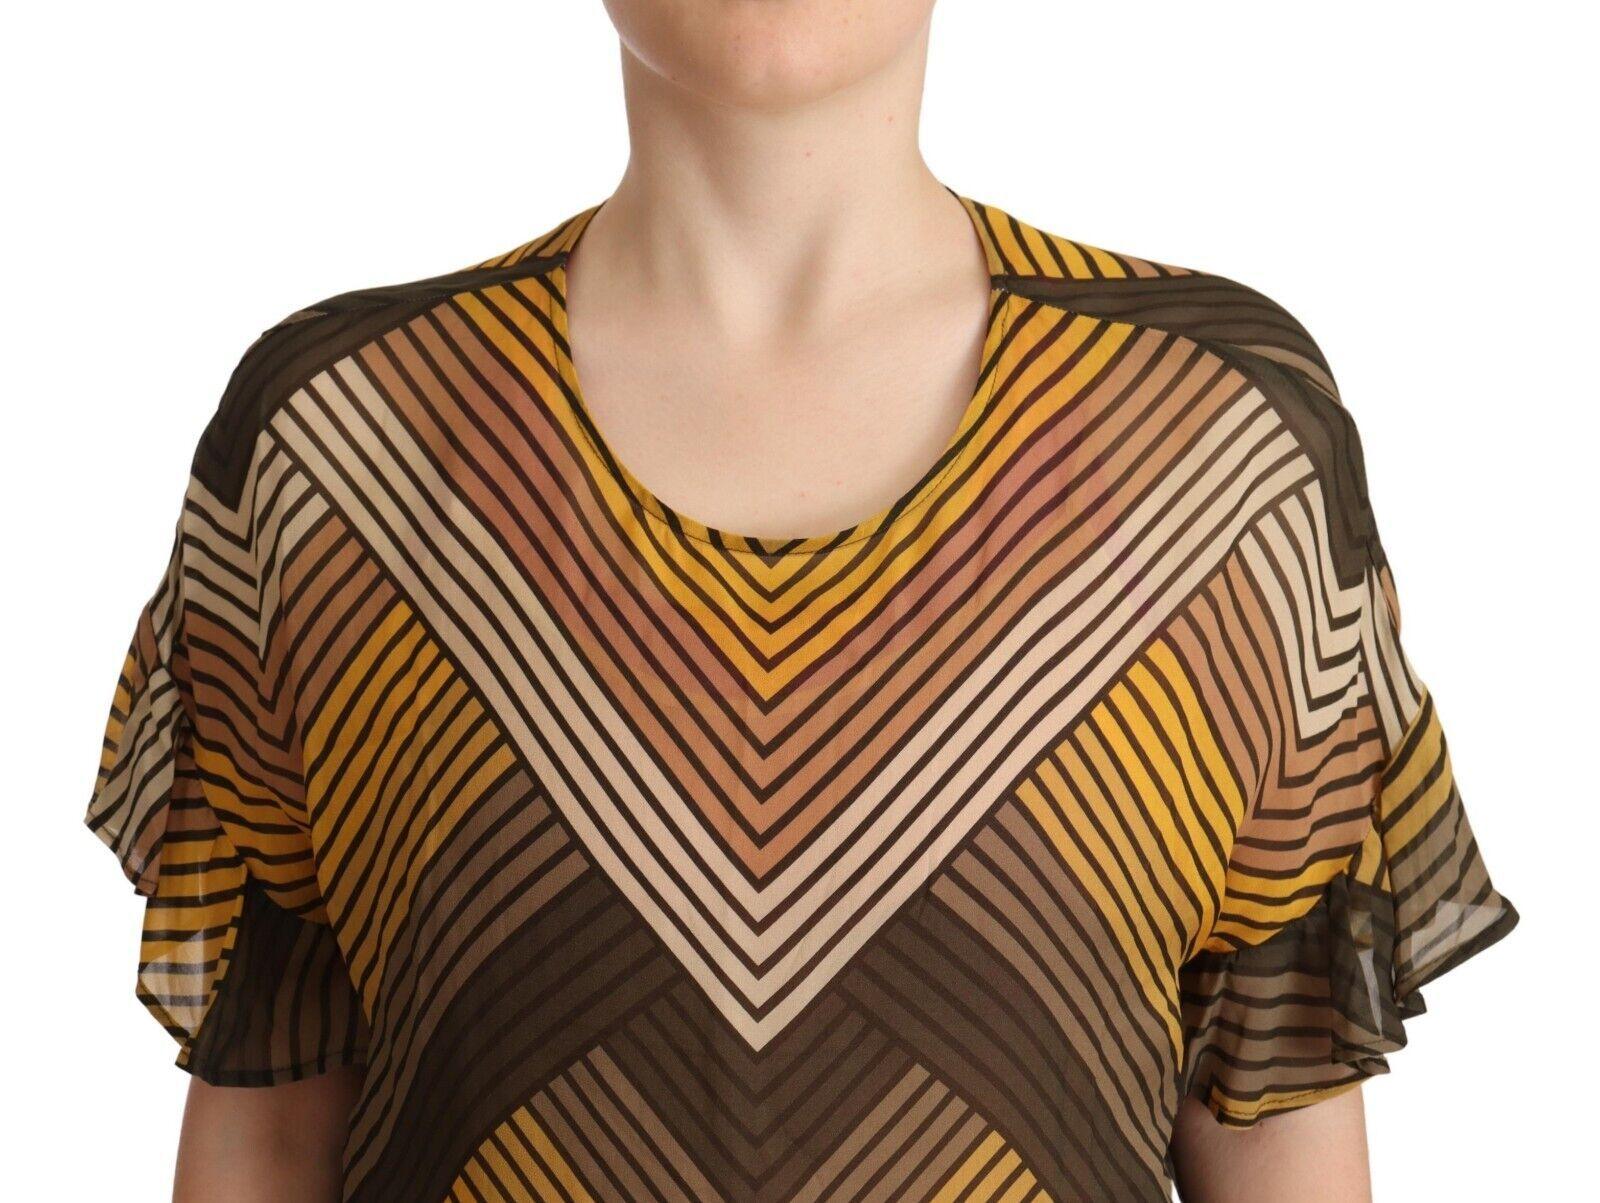 Twinset Chic Multicolor Striped Short Sleeve Blouse - PER.FASHION